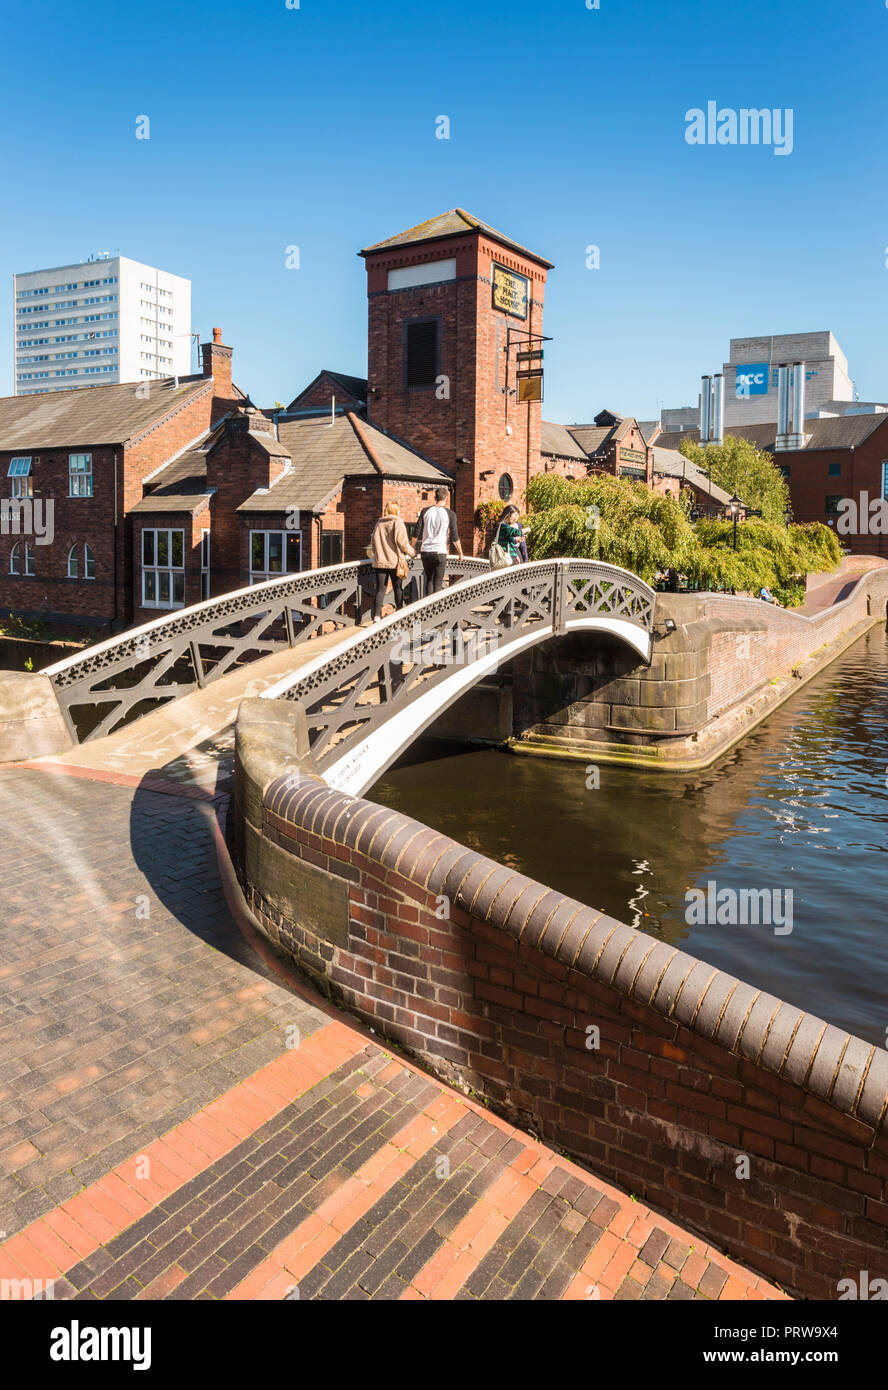 Bridge over canal with the Malthouse pub and restaurant, Brindley Place, Birmingham UK 2018 Stock Photo